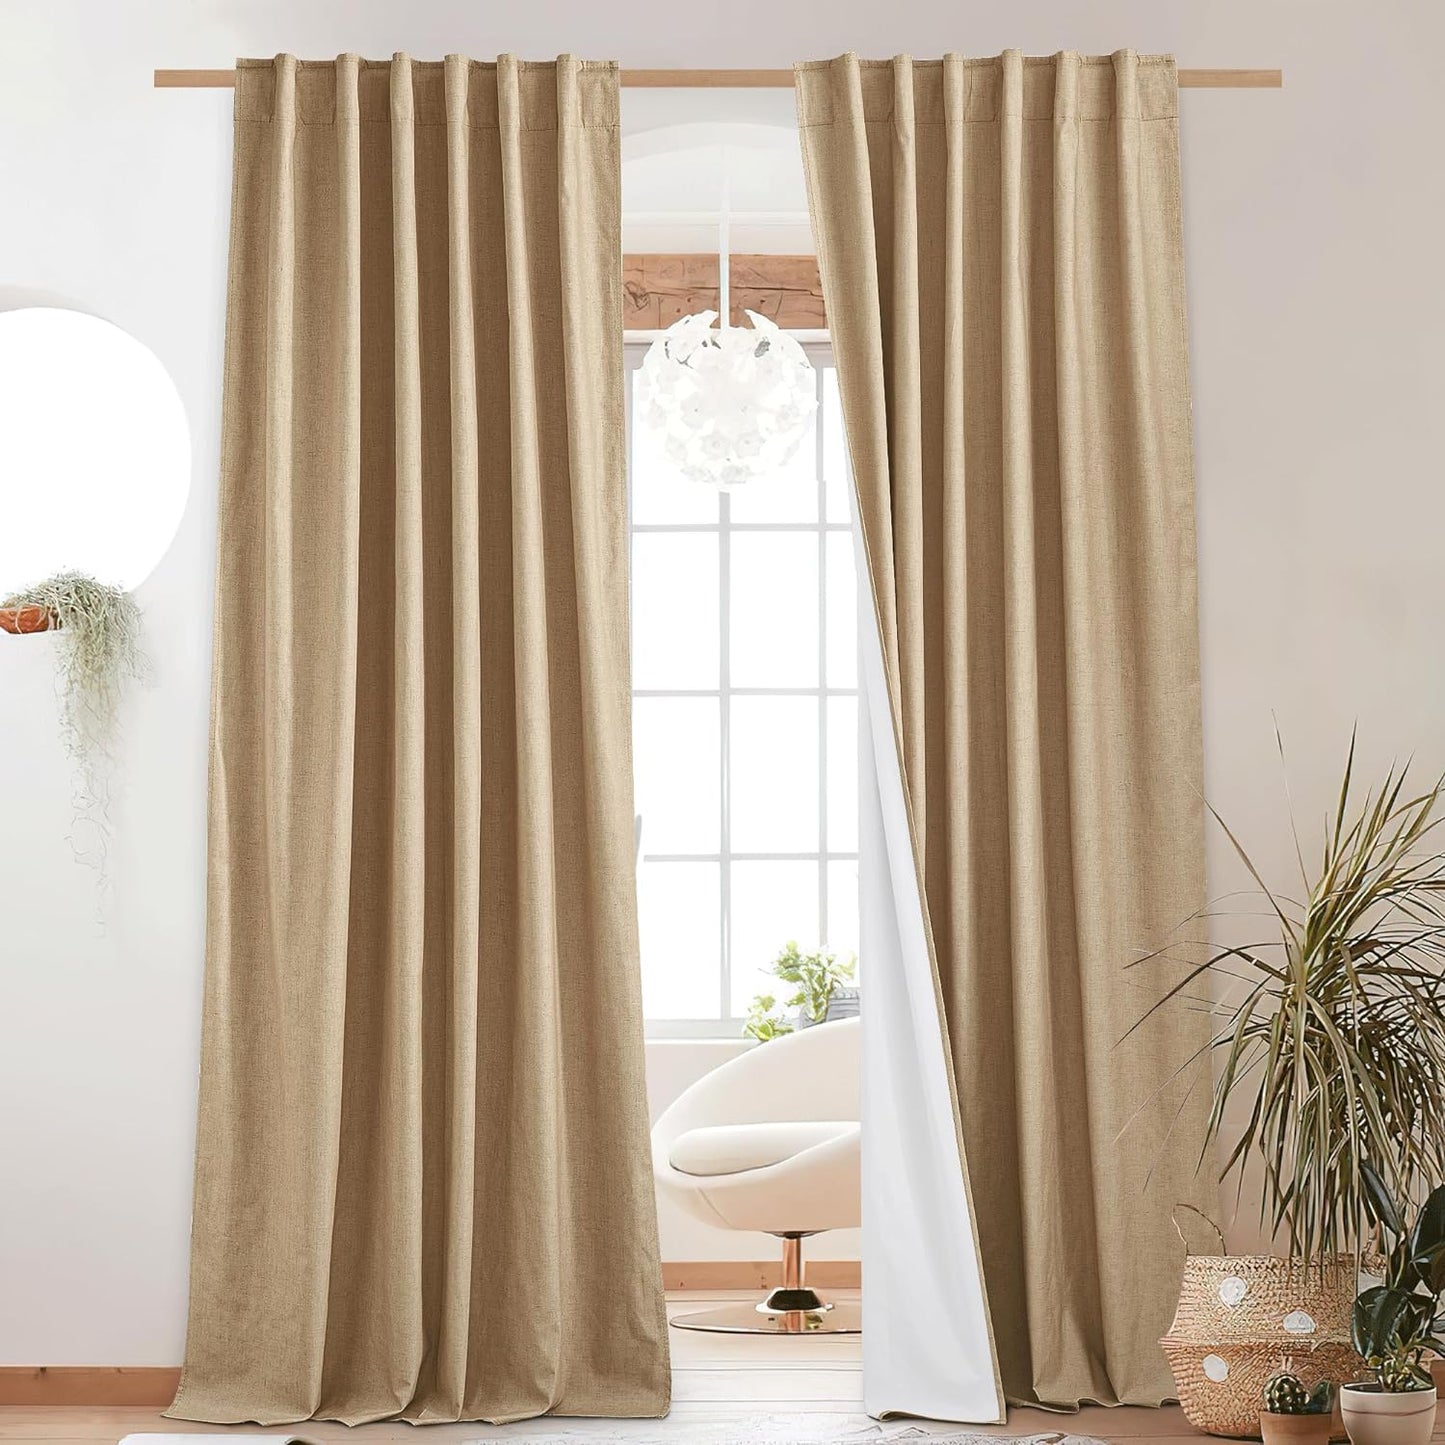 NICETOWN 100% Blackout Linen Curtains for Living Room with Thermal Insulated White Liner, Ivory, 52" Wide, 2 Panels, 84" Long Drapes, Back Tab Retro Linen Curtains Vertical Drapes Privacy for Bedroom  NICETOWN Camel W52 X L90 